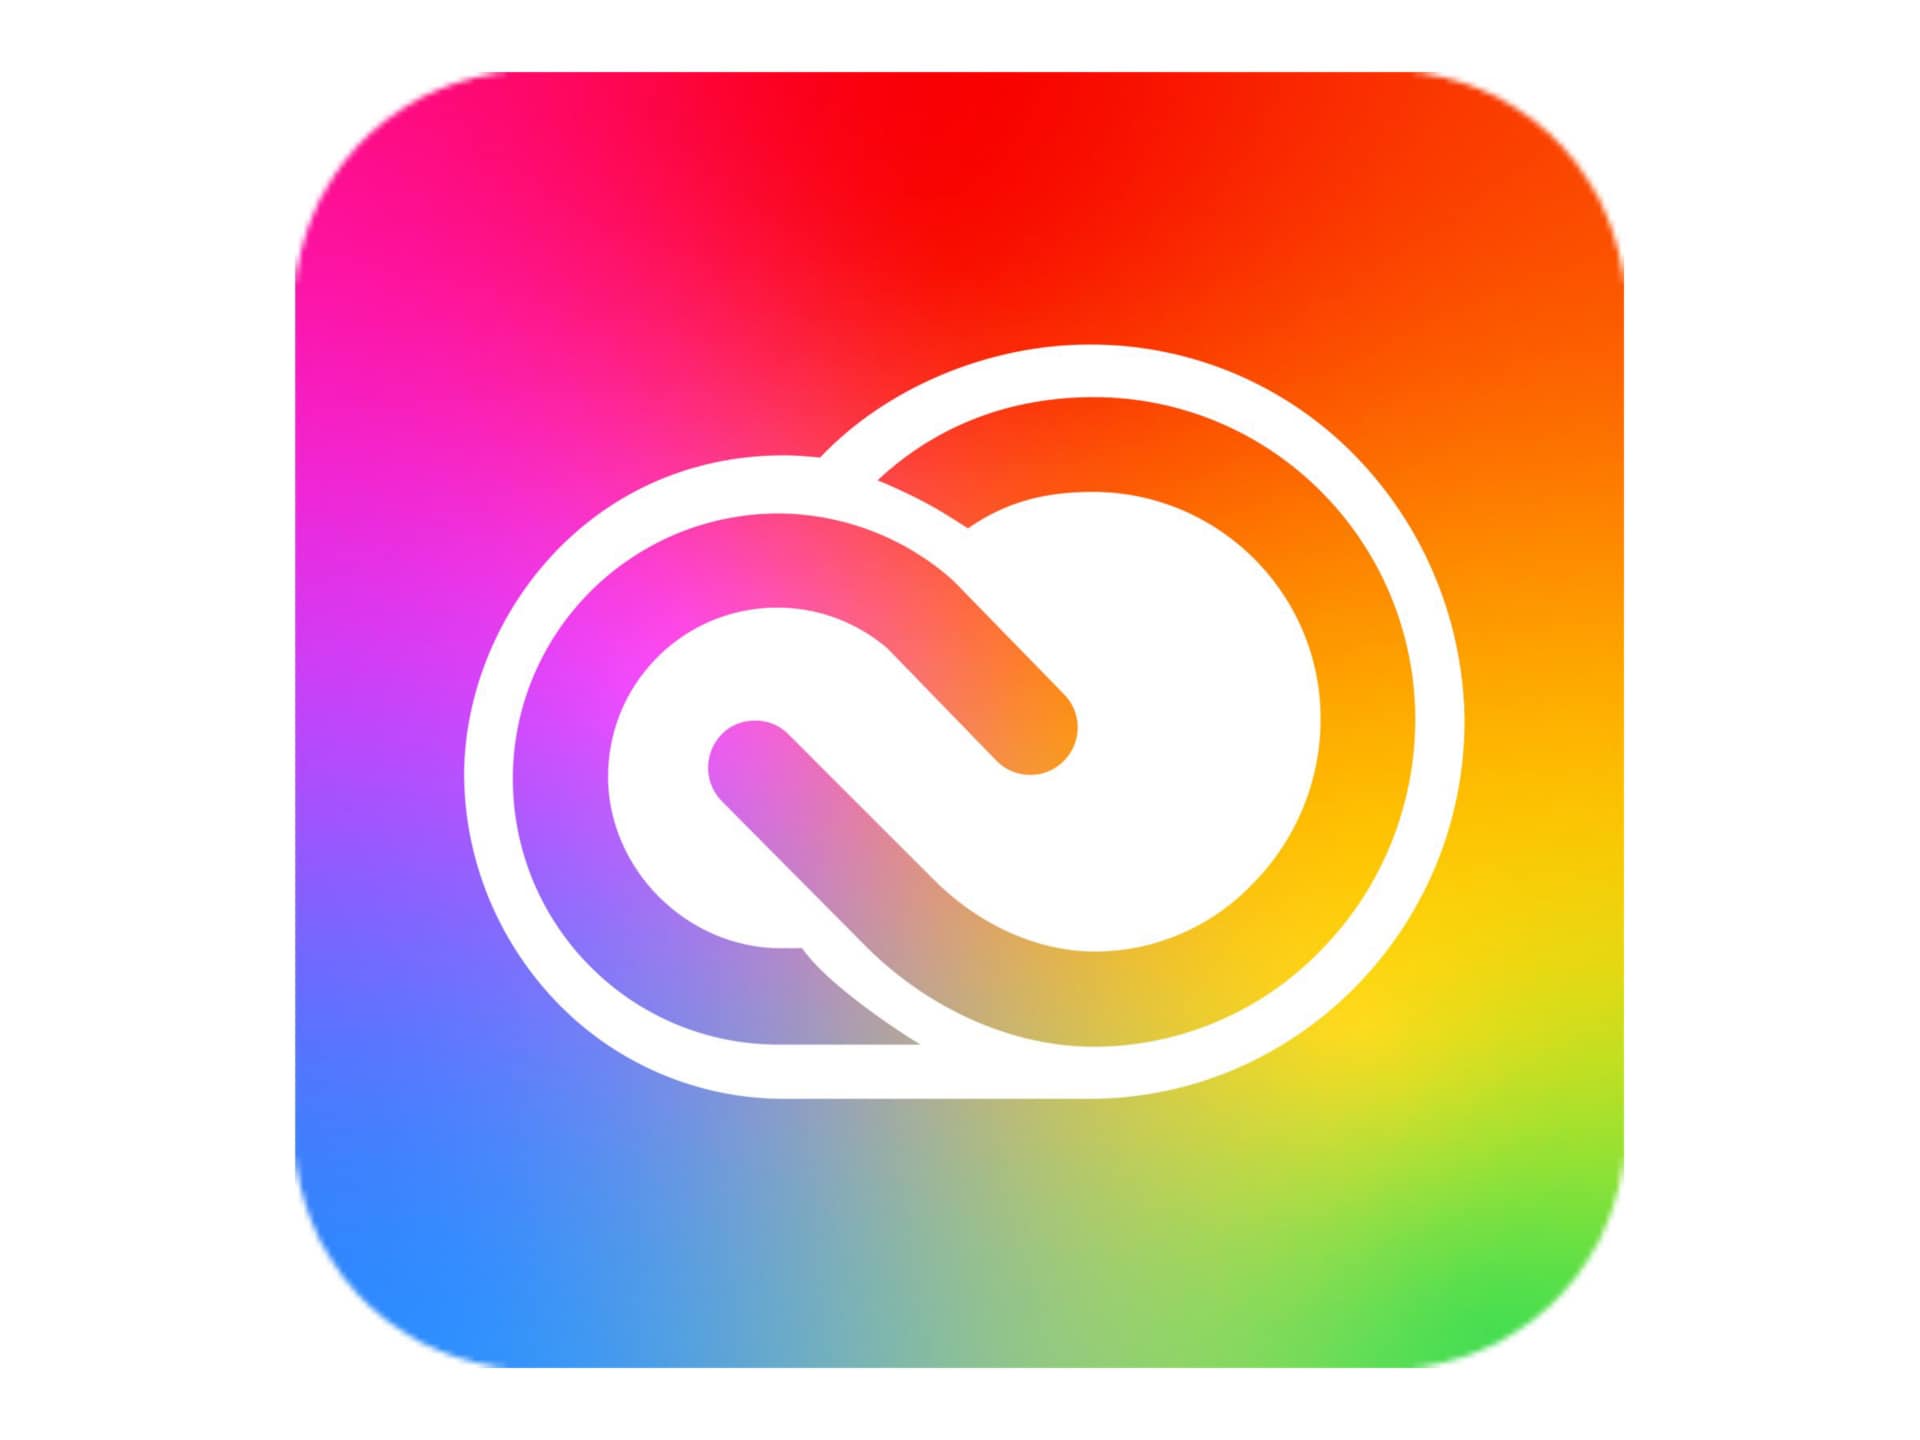 Adobe Creative Cloud for Enterprise - All Apps - Subscription New (10 months) - 1 named user